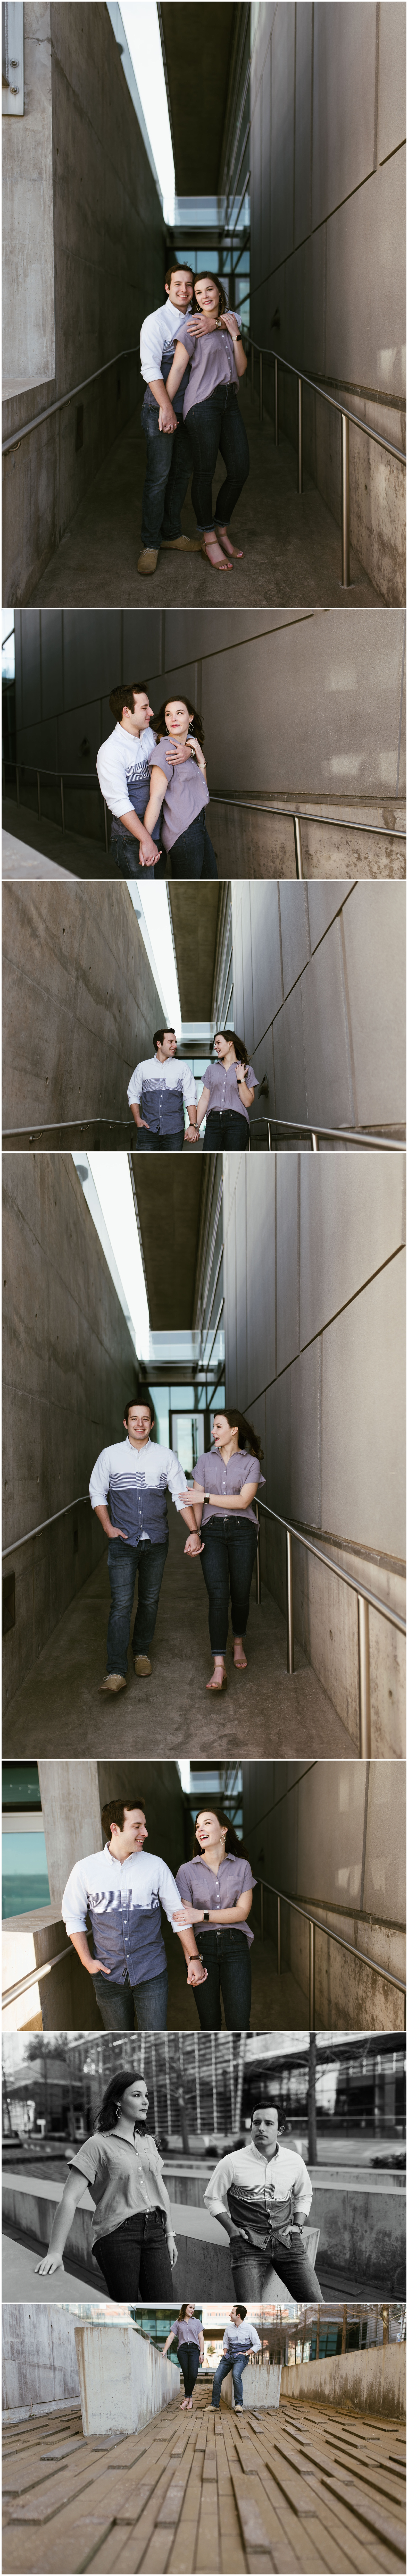  Downtown Fort Worth Engagement Session | Fort Worth Engagement Photographer | www.jordanmitchellphotography.com 